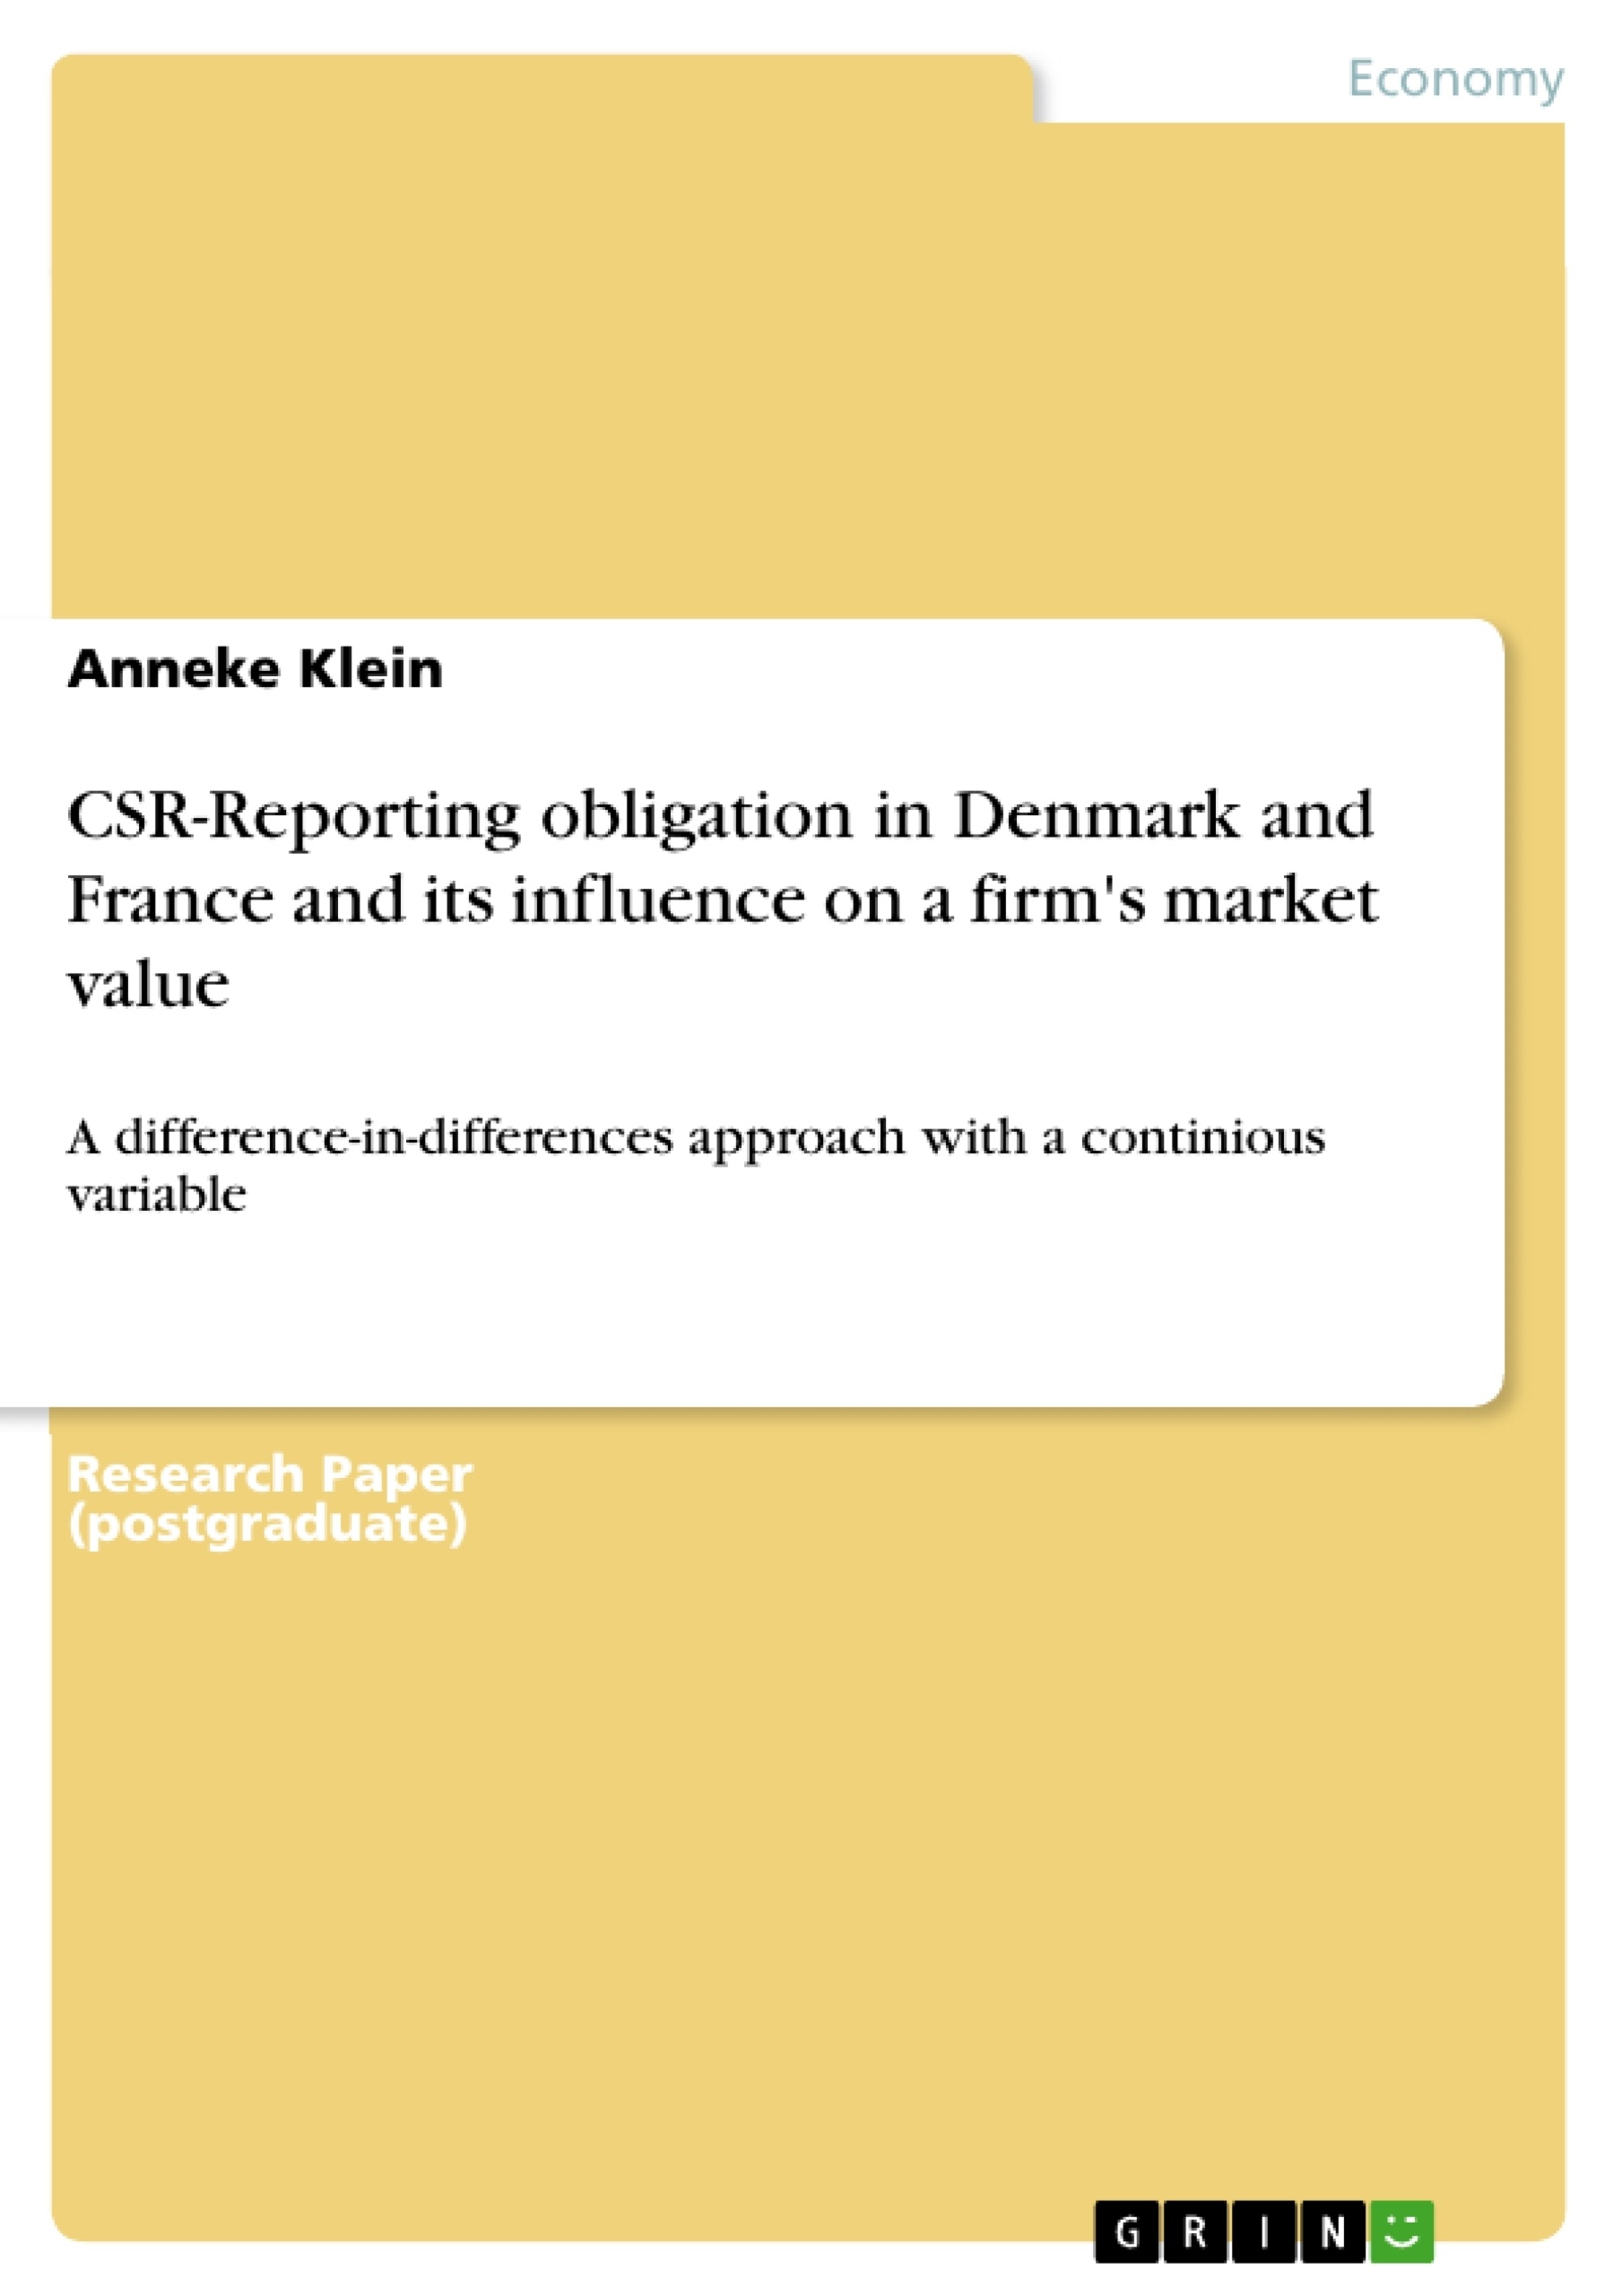 Titre: CSR-Reporting obligation in Denmark and France and its influence on a firm's market value